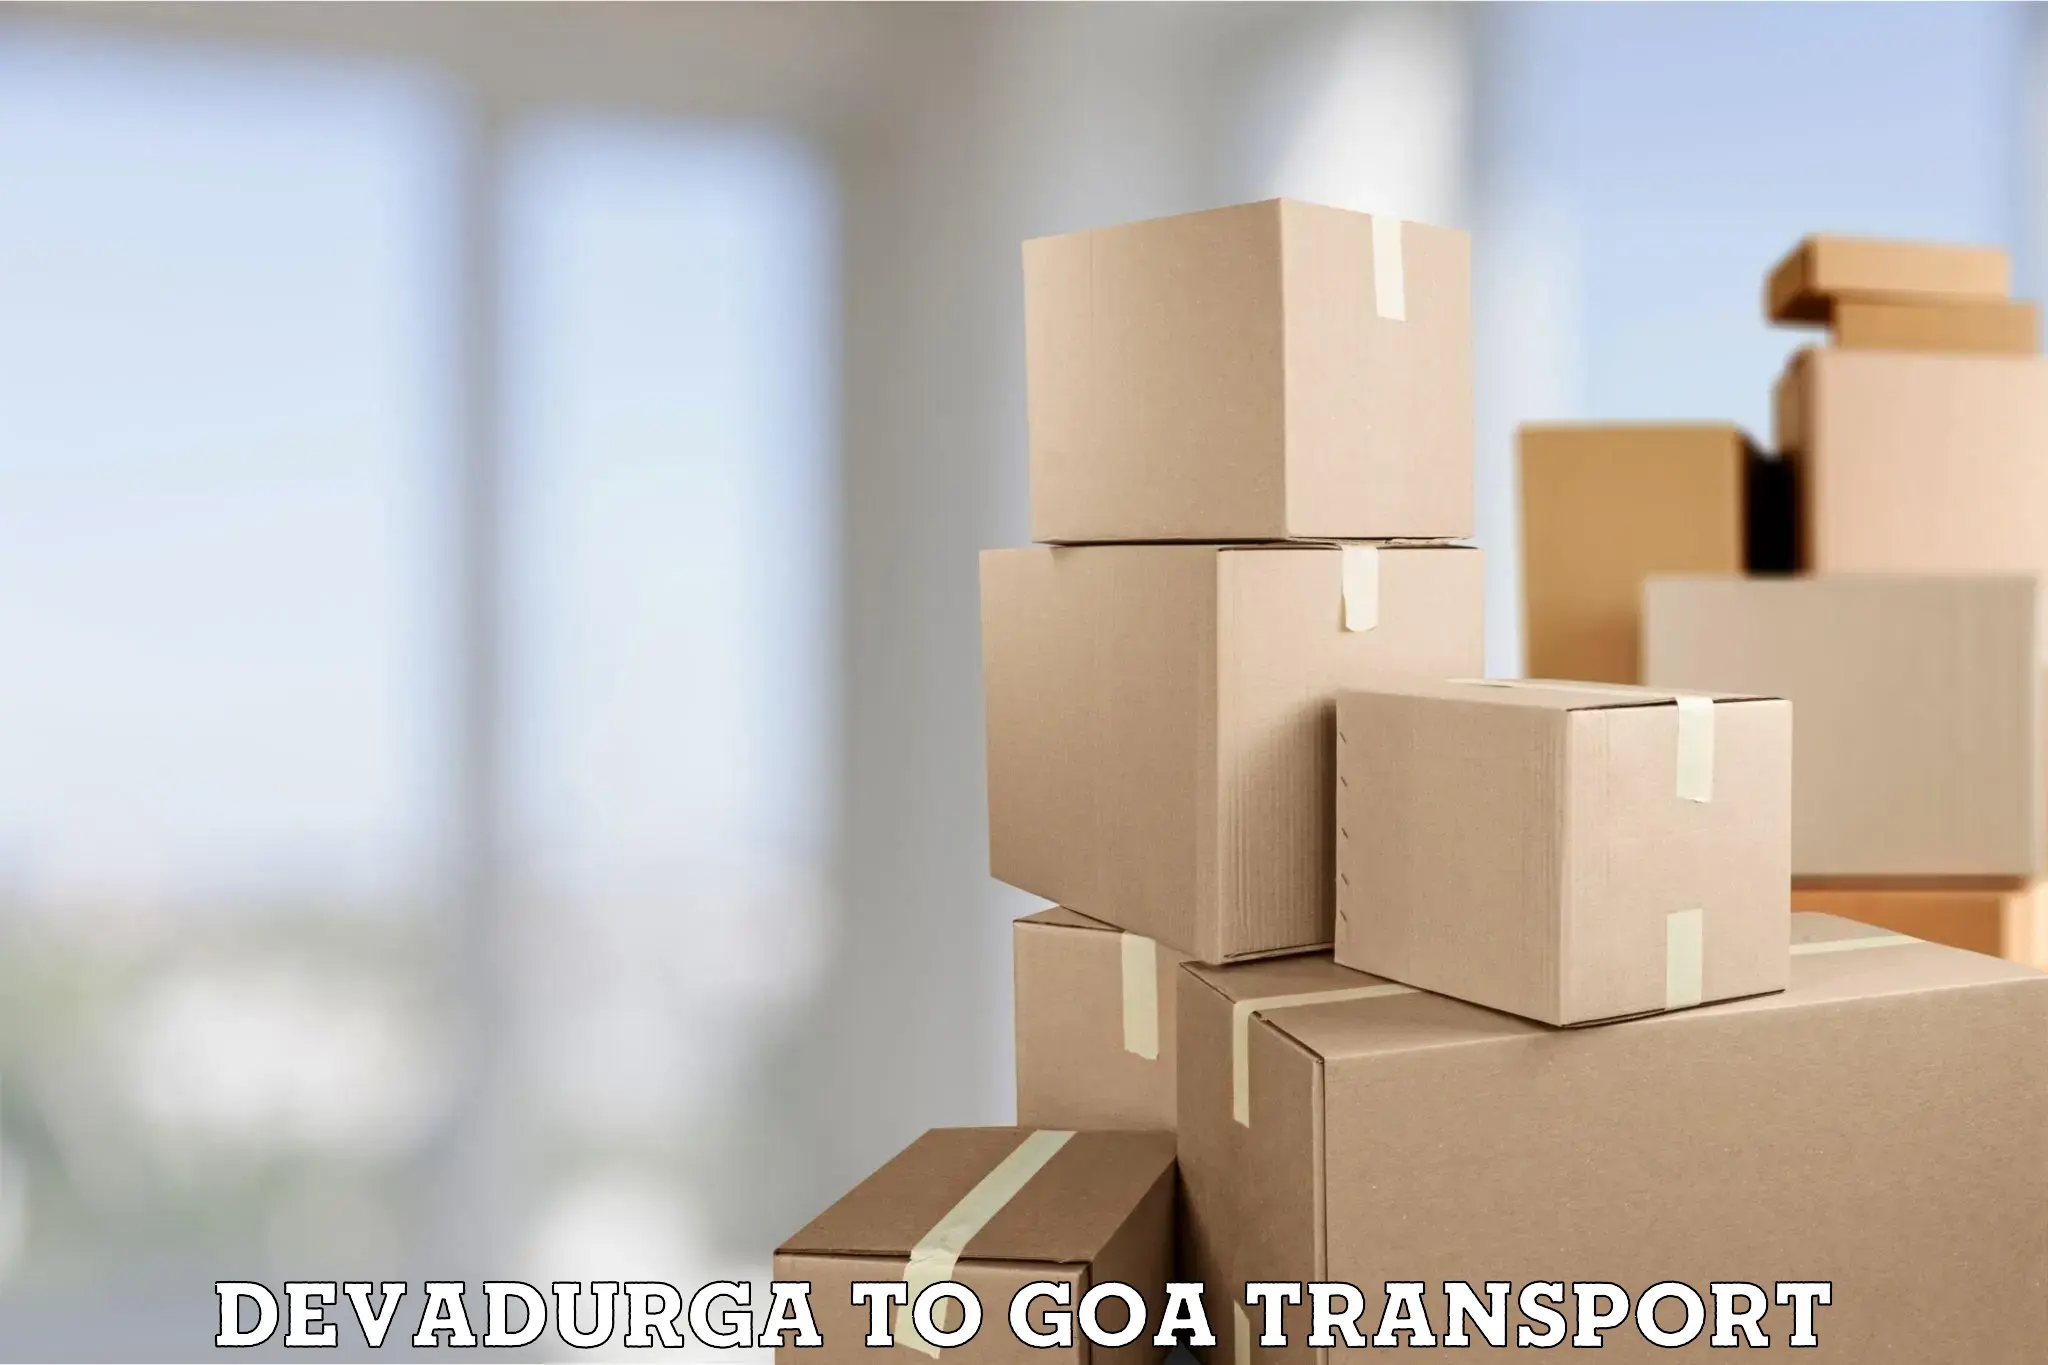 Transport bike from one state to another in Devadurga to Mormugao Port